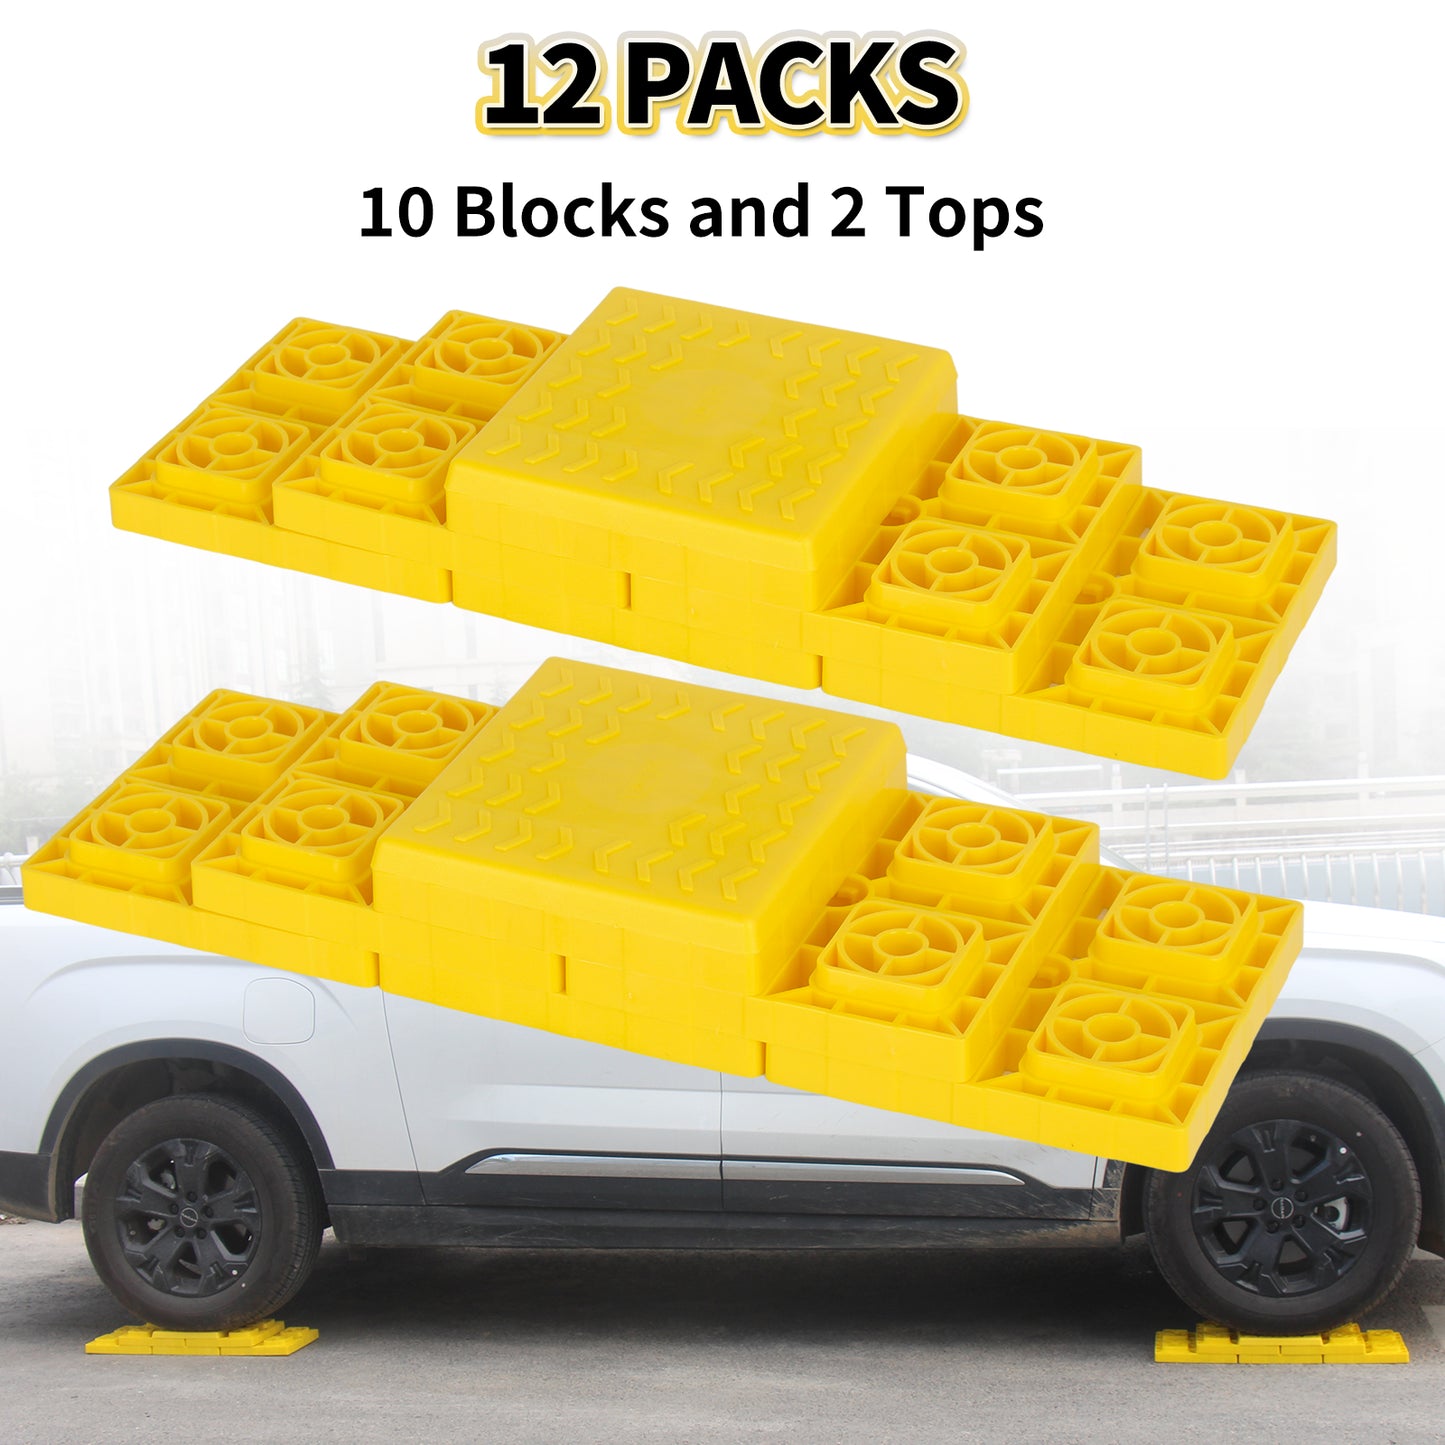 RV Leveling Blocks, 12 Pack Stackable Jack Blocks, with Carrying Bag, OLM-1901P